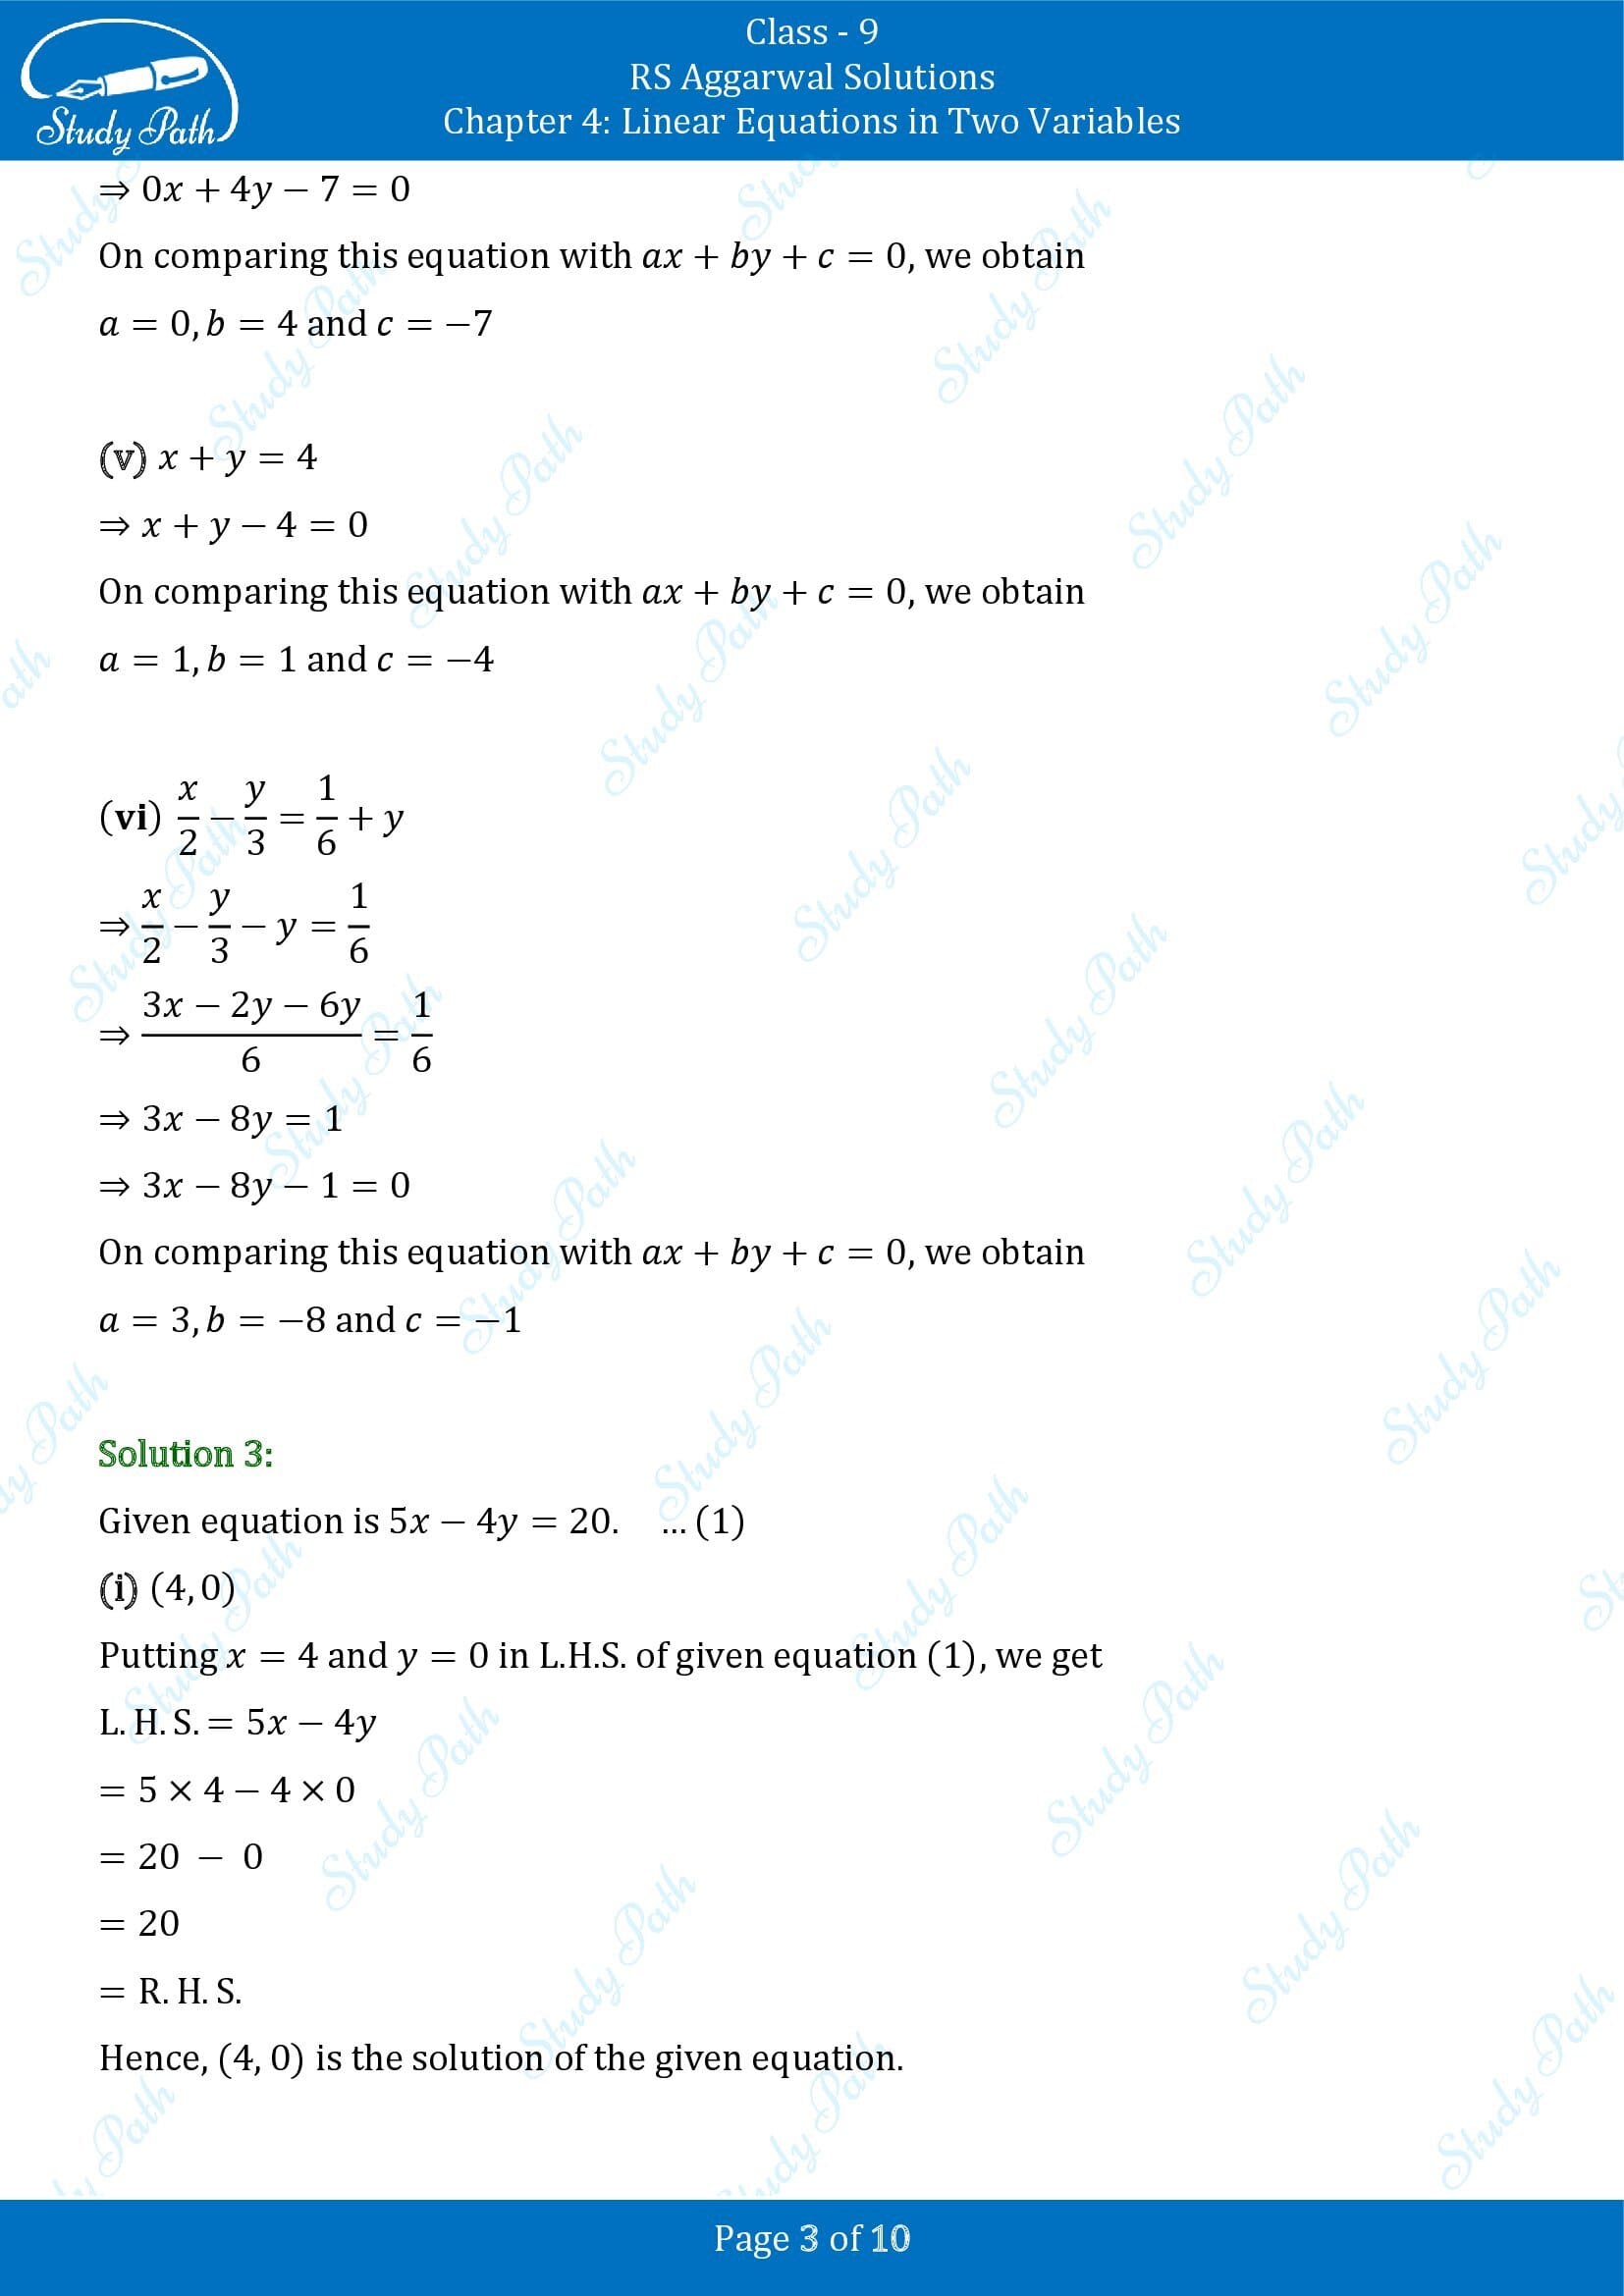 RS Aggarwal Solutions Class 9 Chapter 4 Linear Equations in Two Variables Exercise 4A 0003